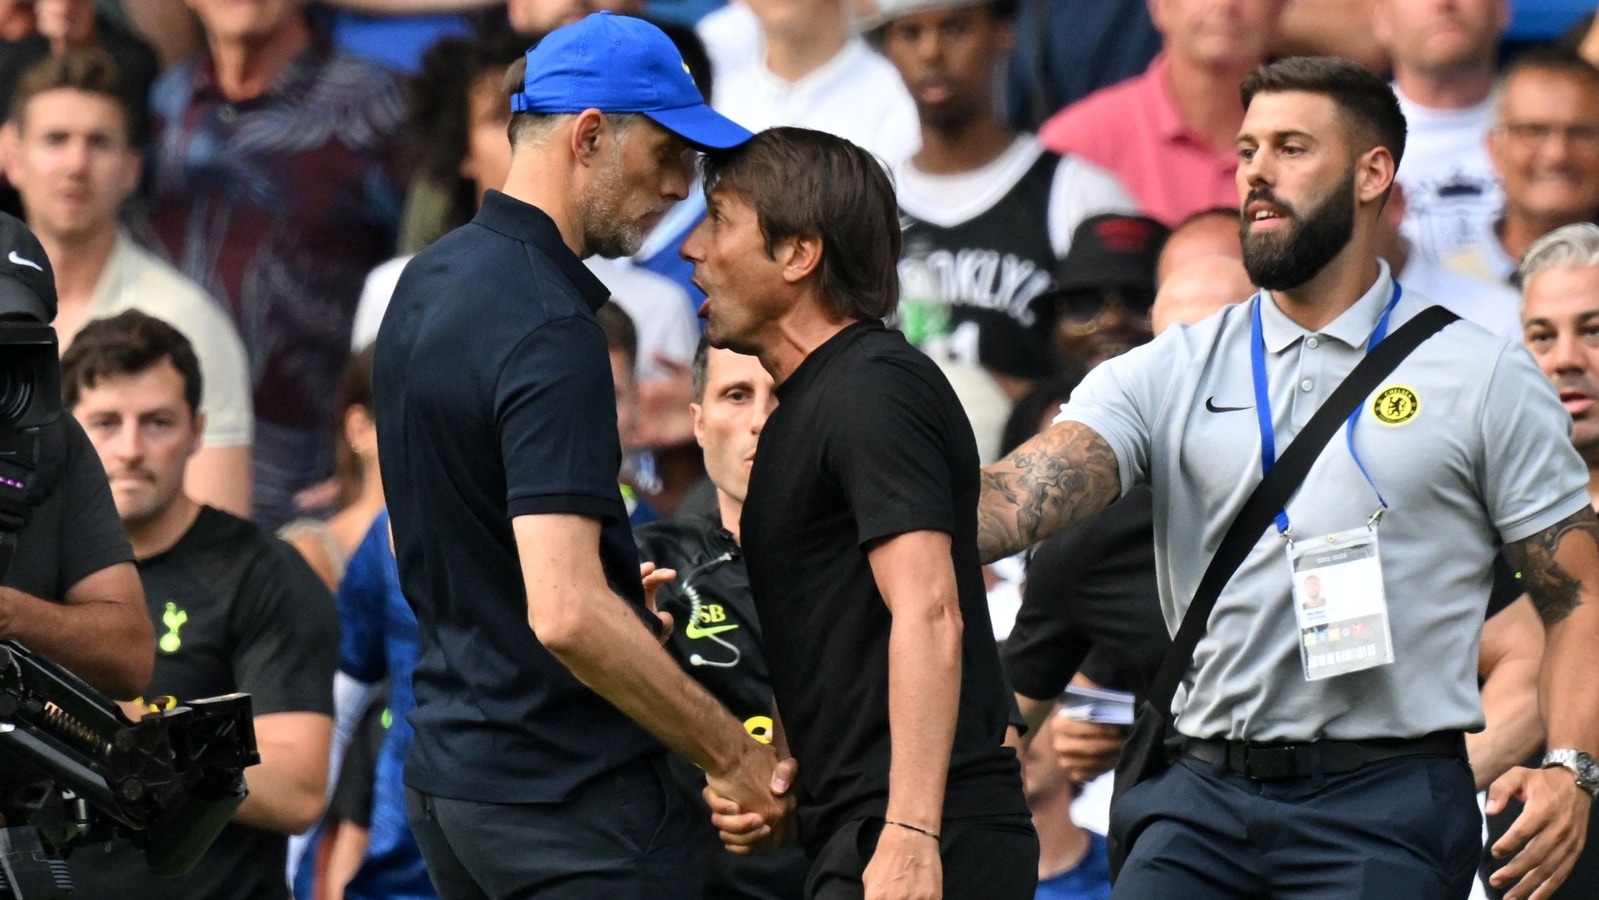 Tuchel on Conte after fiery tussle in Chelsea-Tottenham draw: ‘When you shake hands you look into each other’s eyes’